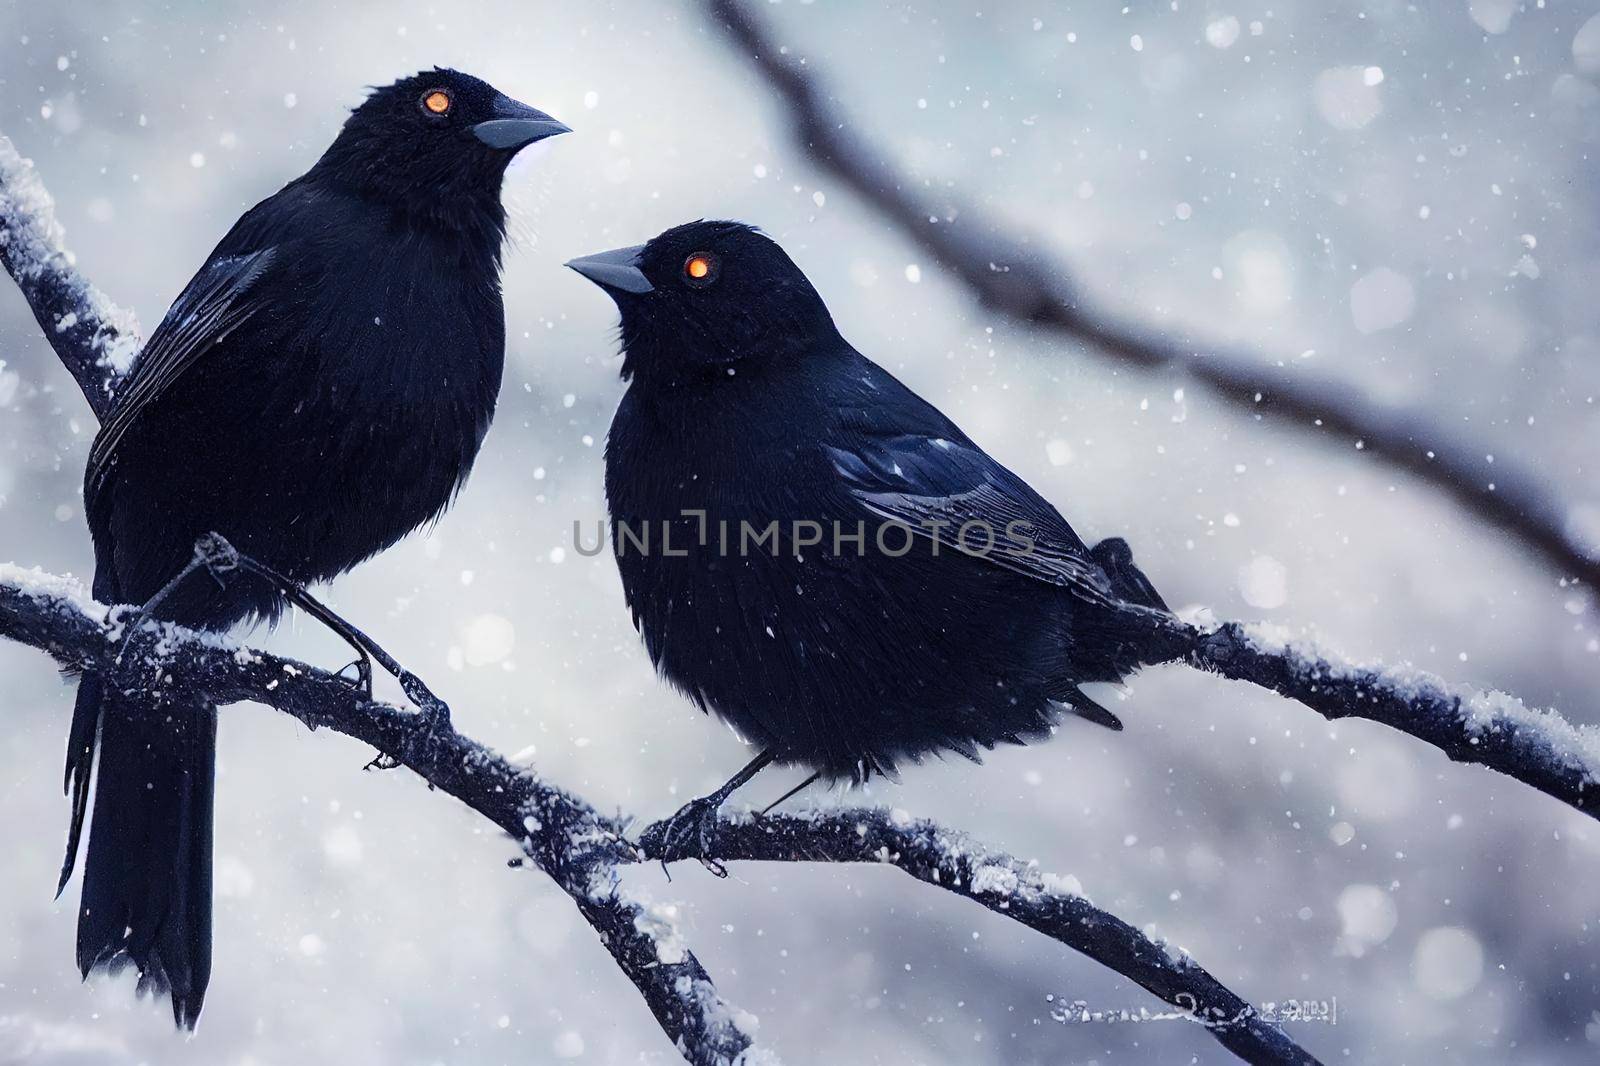 Eurasian Blackbird on bush with snow in winter, the High quality 2d illustration. by 2ragon